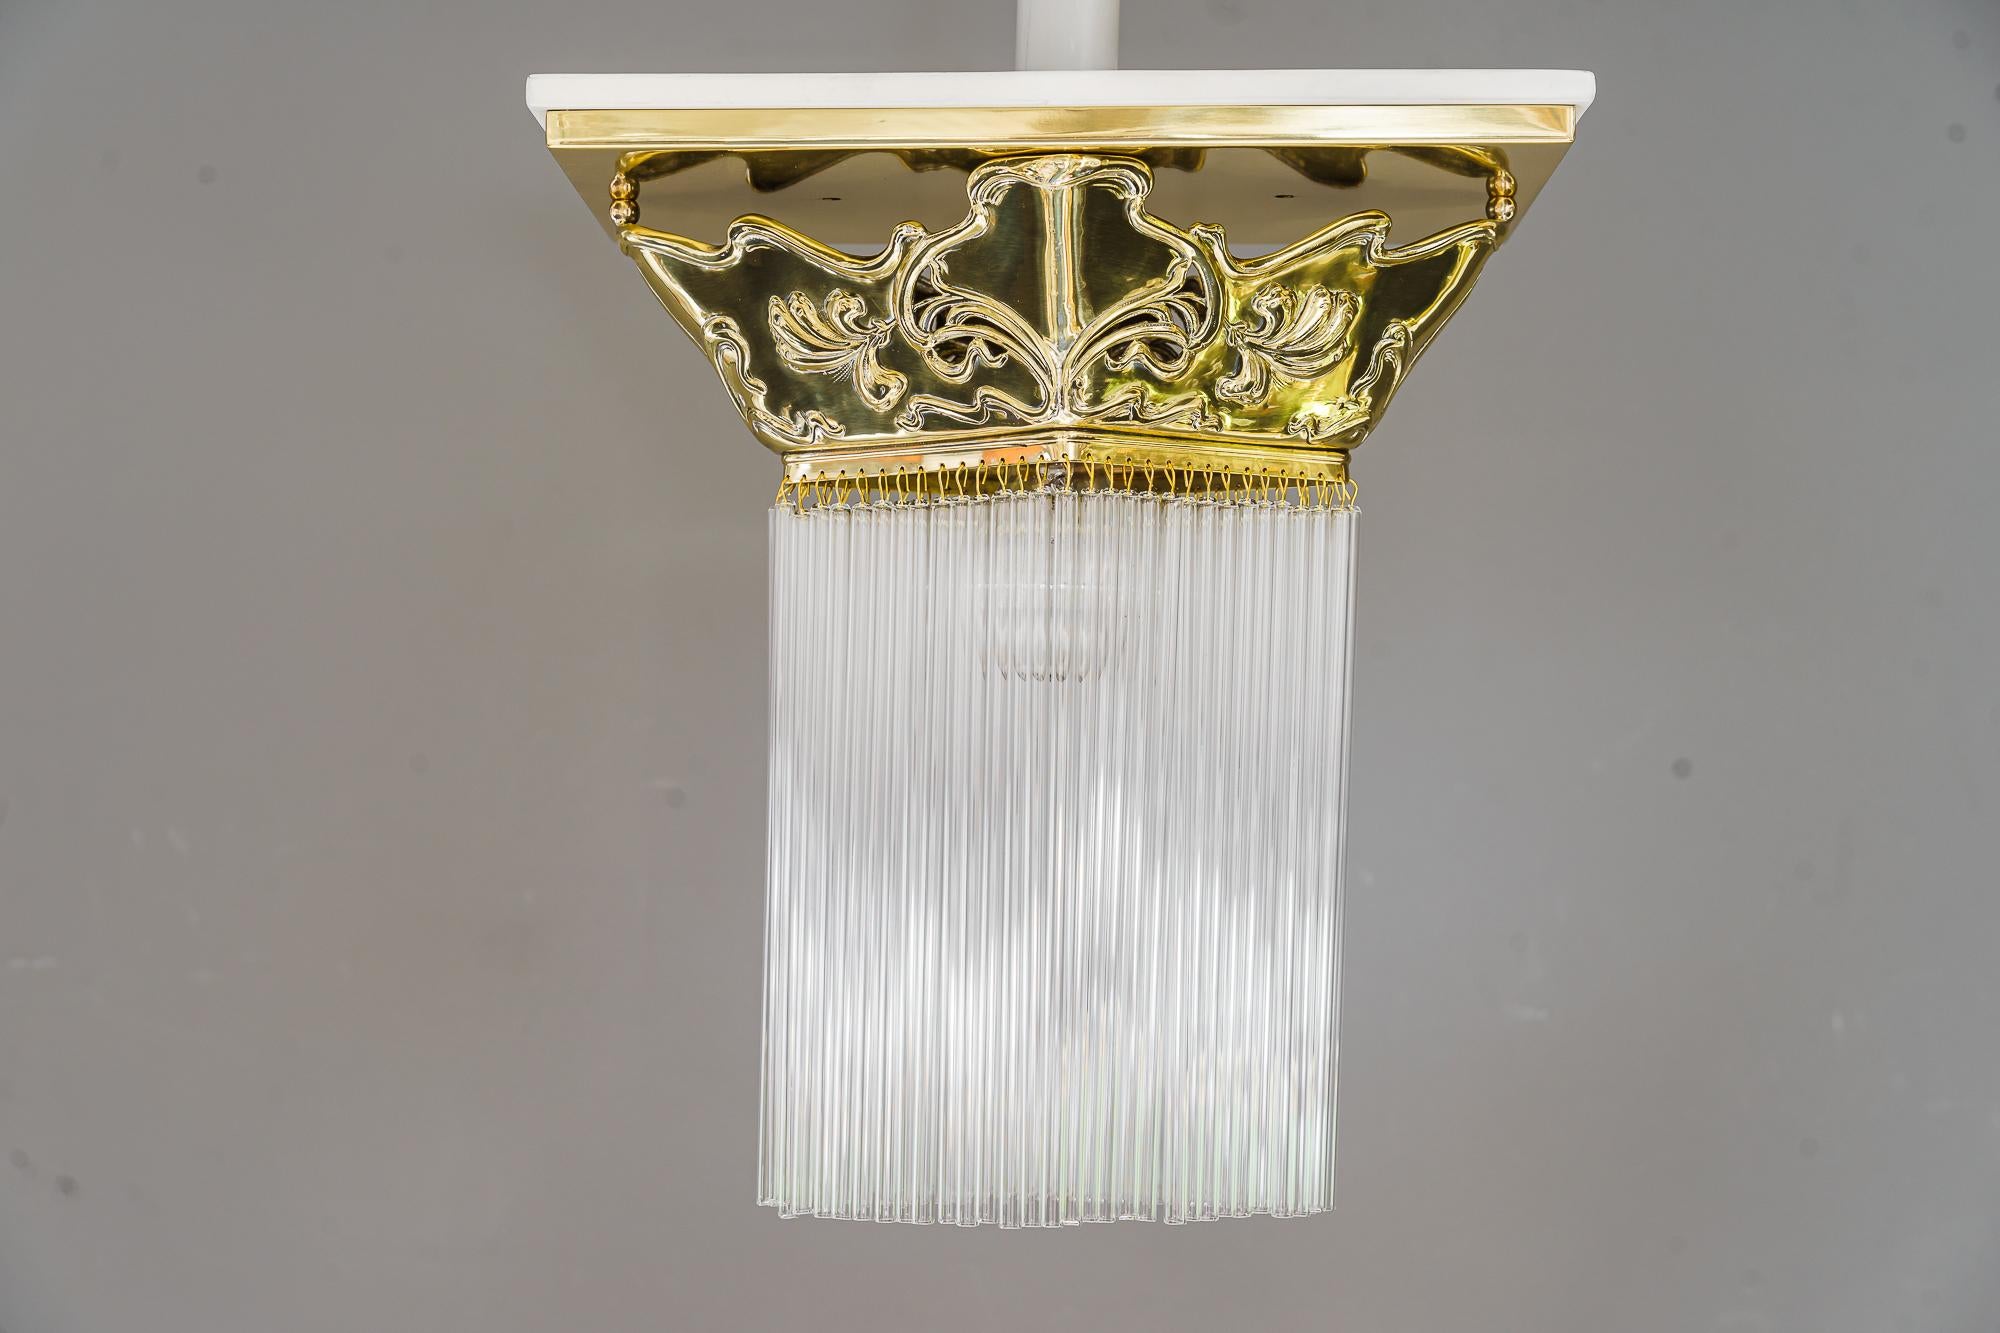 Jugendstil ceiling lamp vienna around 1908 ( floral )
Brass polished and stove enameled
The glass sticks are replaced ( new )
Wood white painted on top.